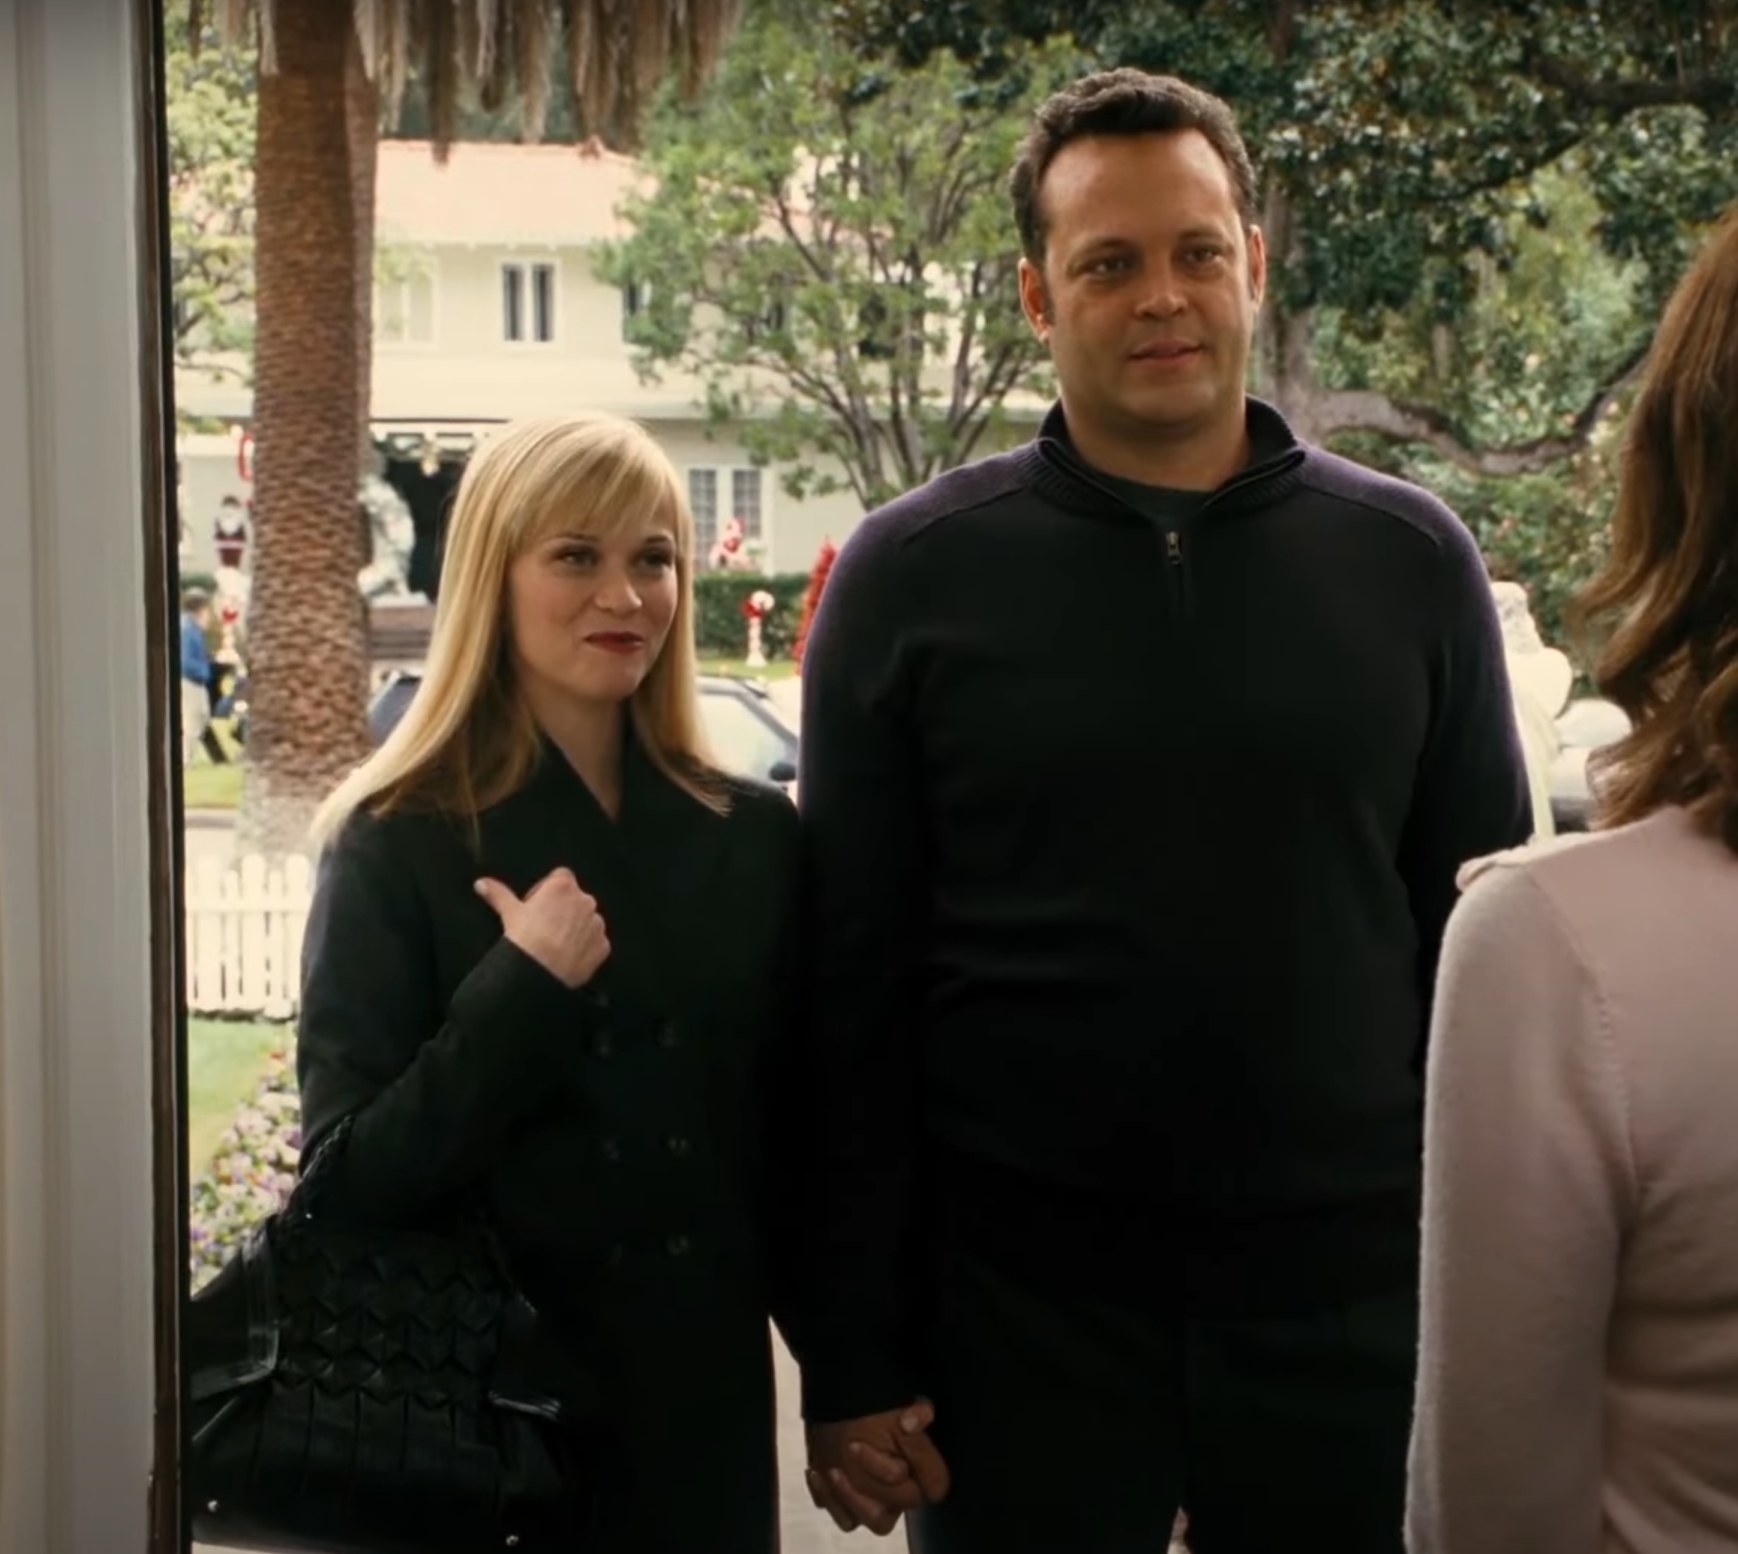 Reese Witherspoon and Vince Vaughn as Kate and Brad greet Kate&#x27;s mom